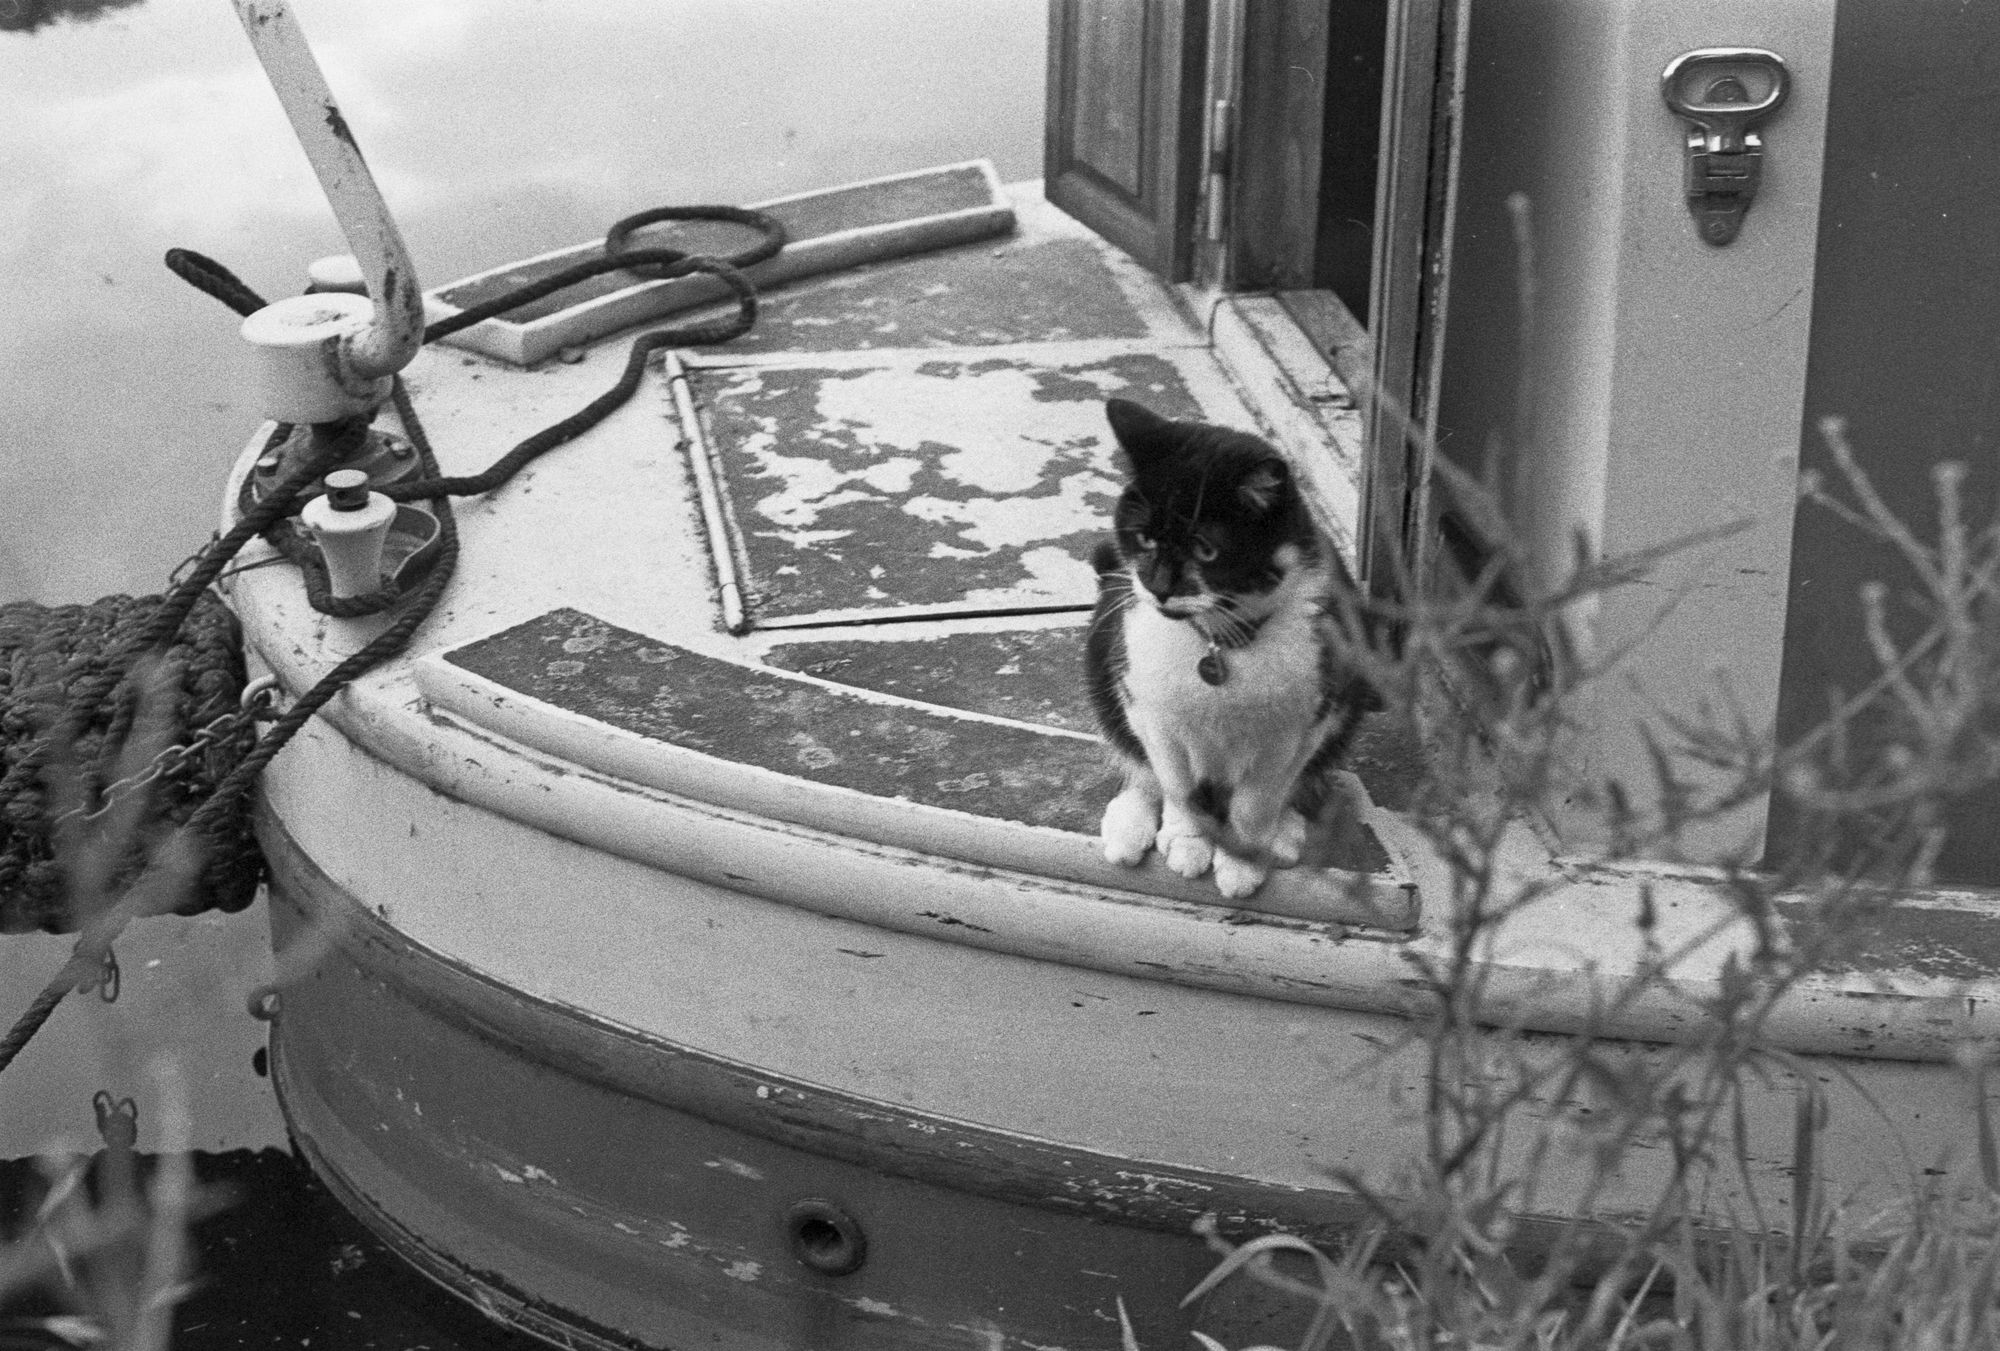 A black and white cat sat on a canal boat near its two doors that are open.